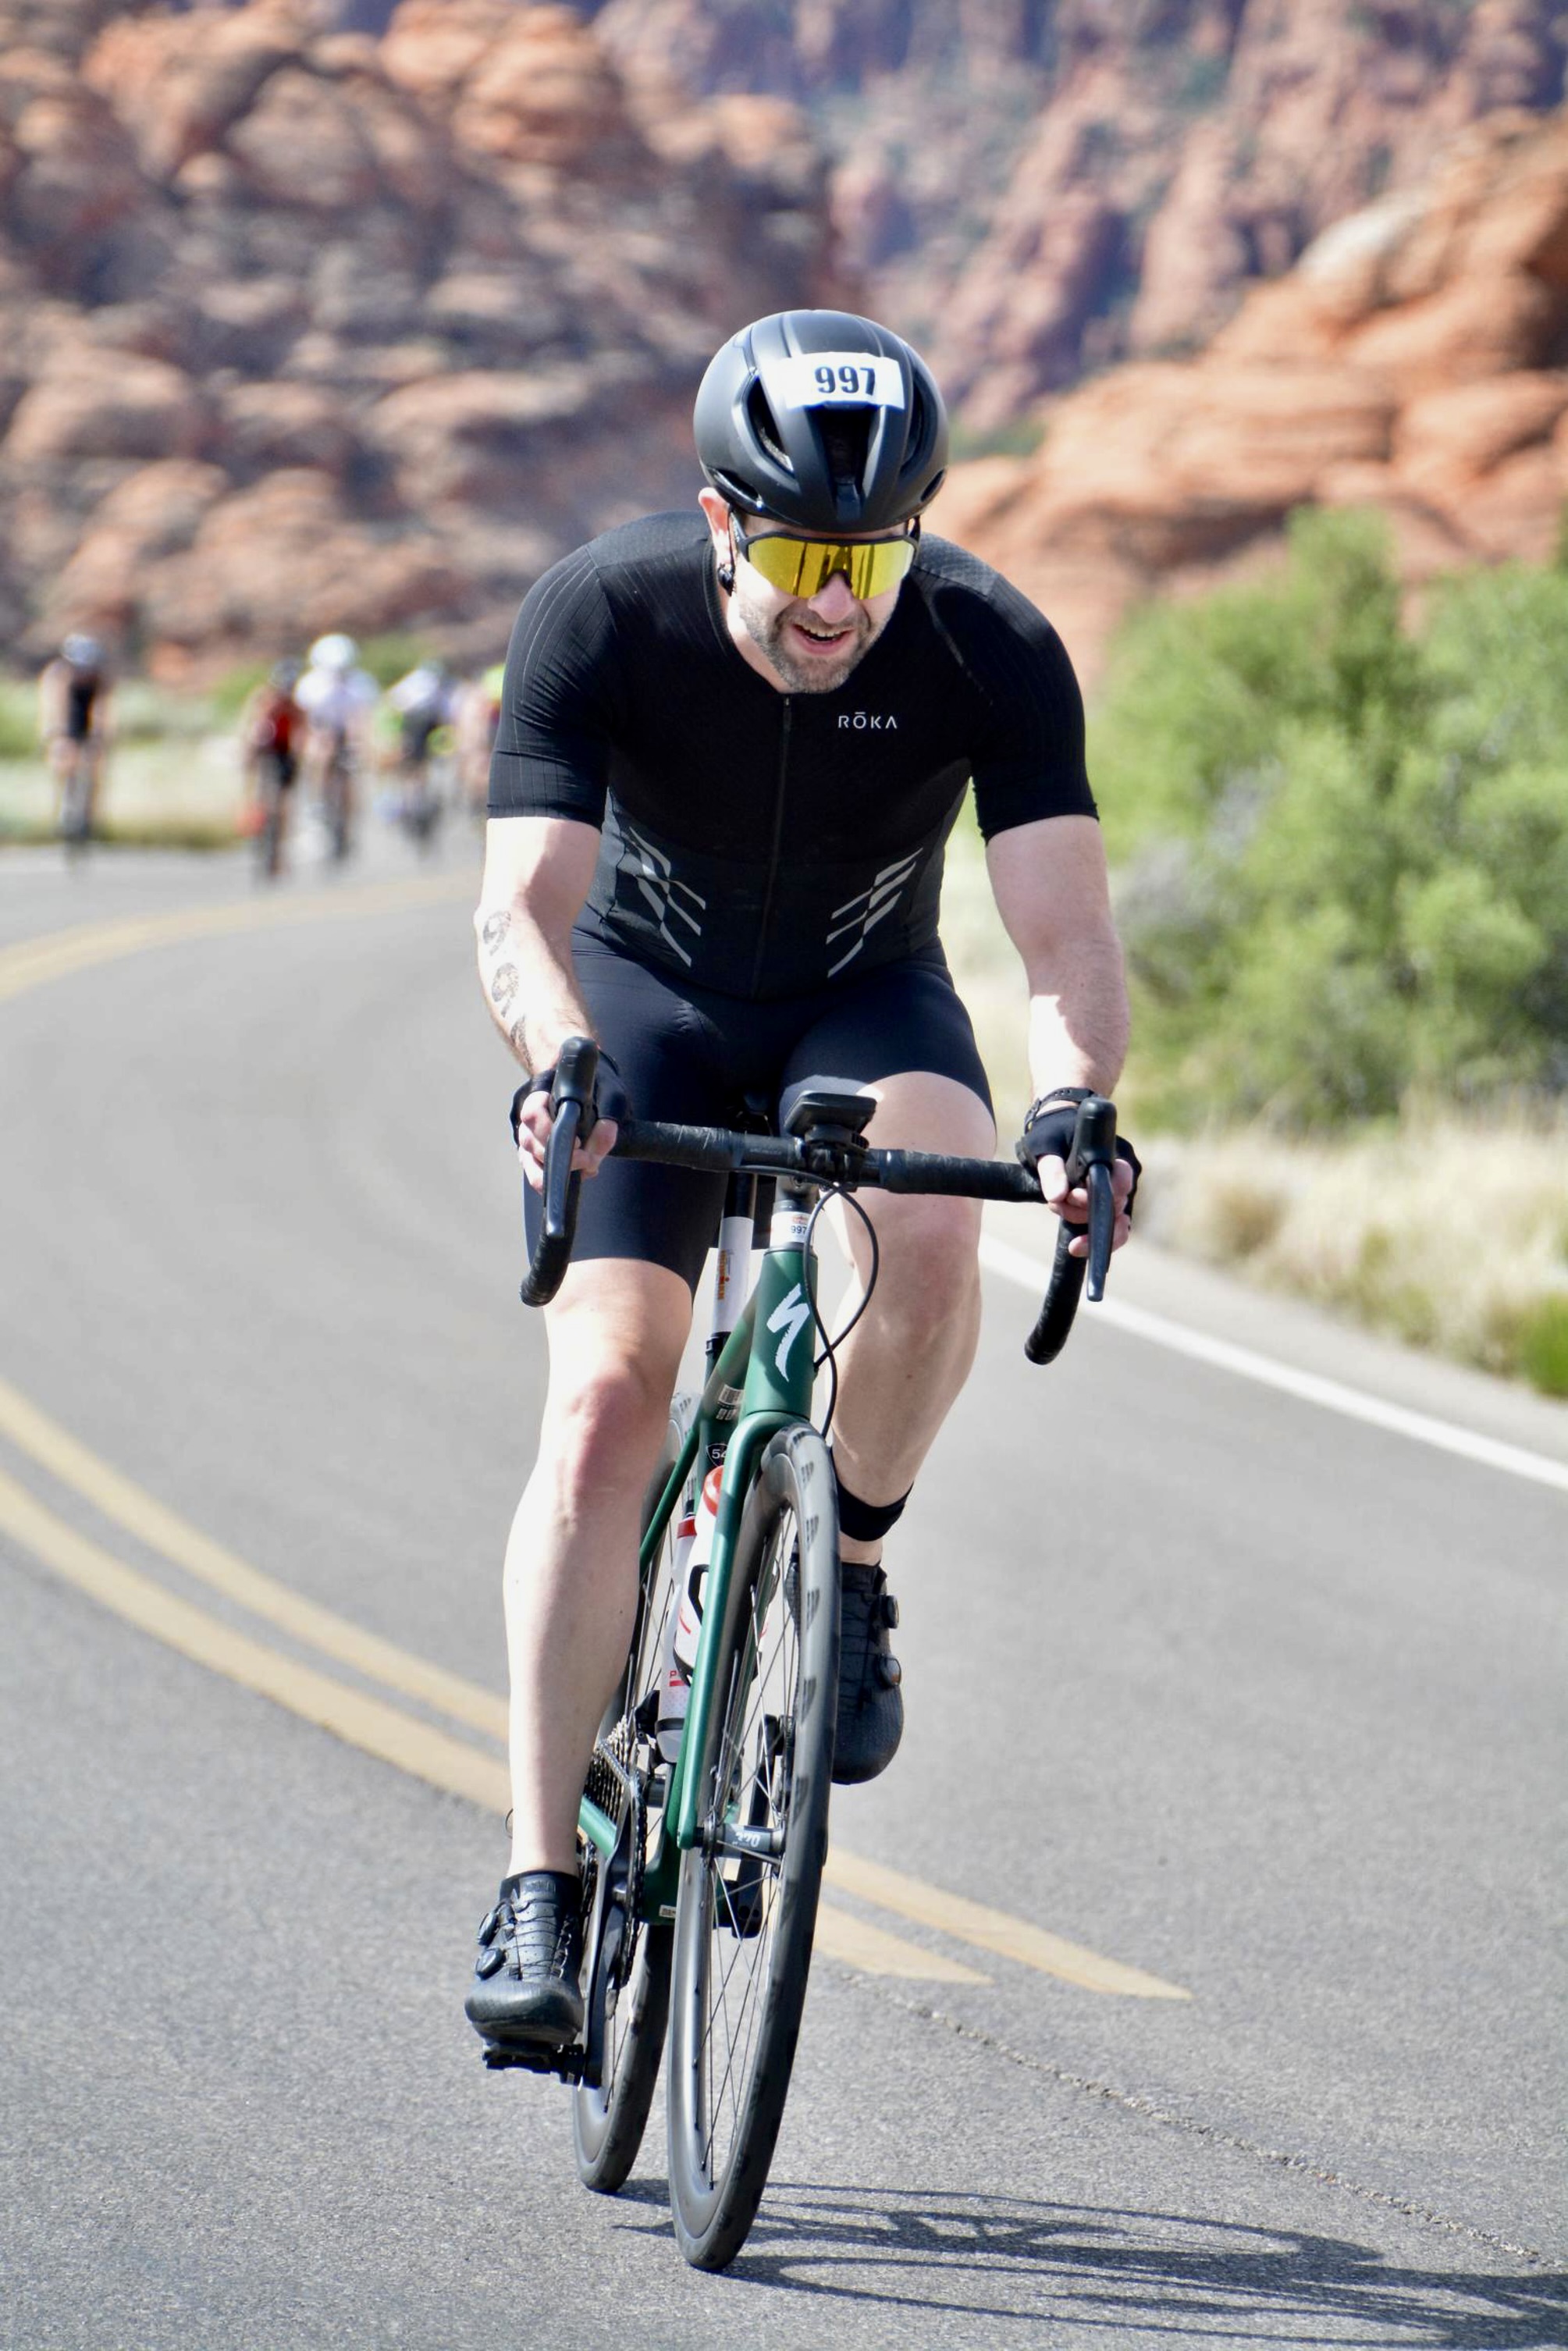 Front view of me climbing on a green Specialized Aethos bike through Snow Canyon. A group of cyclists can be seen in the background behind me. I'm wearing a black helmet, black trisuit, black gloves, black shoes, and gold sunglasses. I have a race tattoo in my right arm with the number 997. The helmet has a sticker on it with the same number.